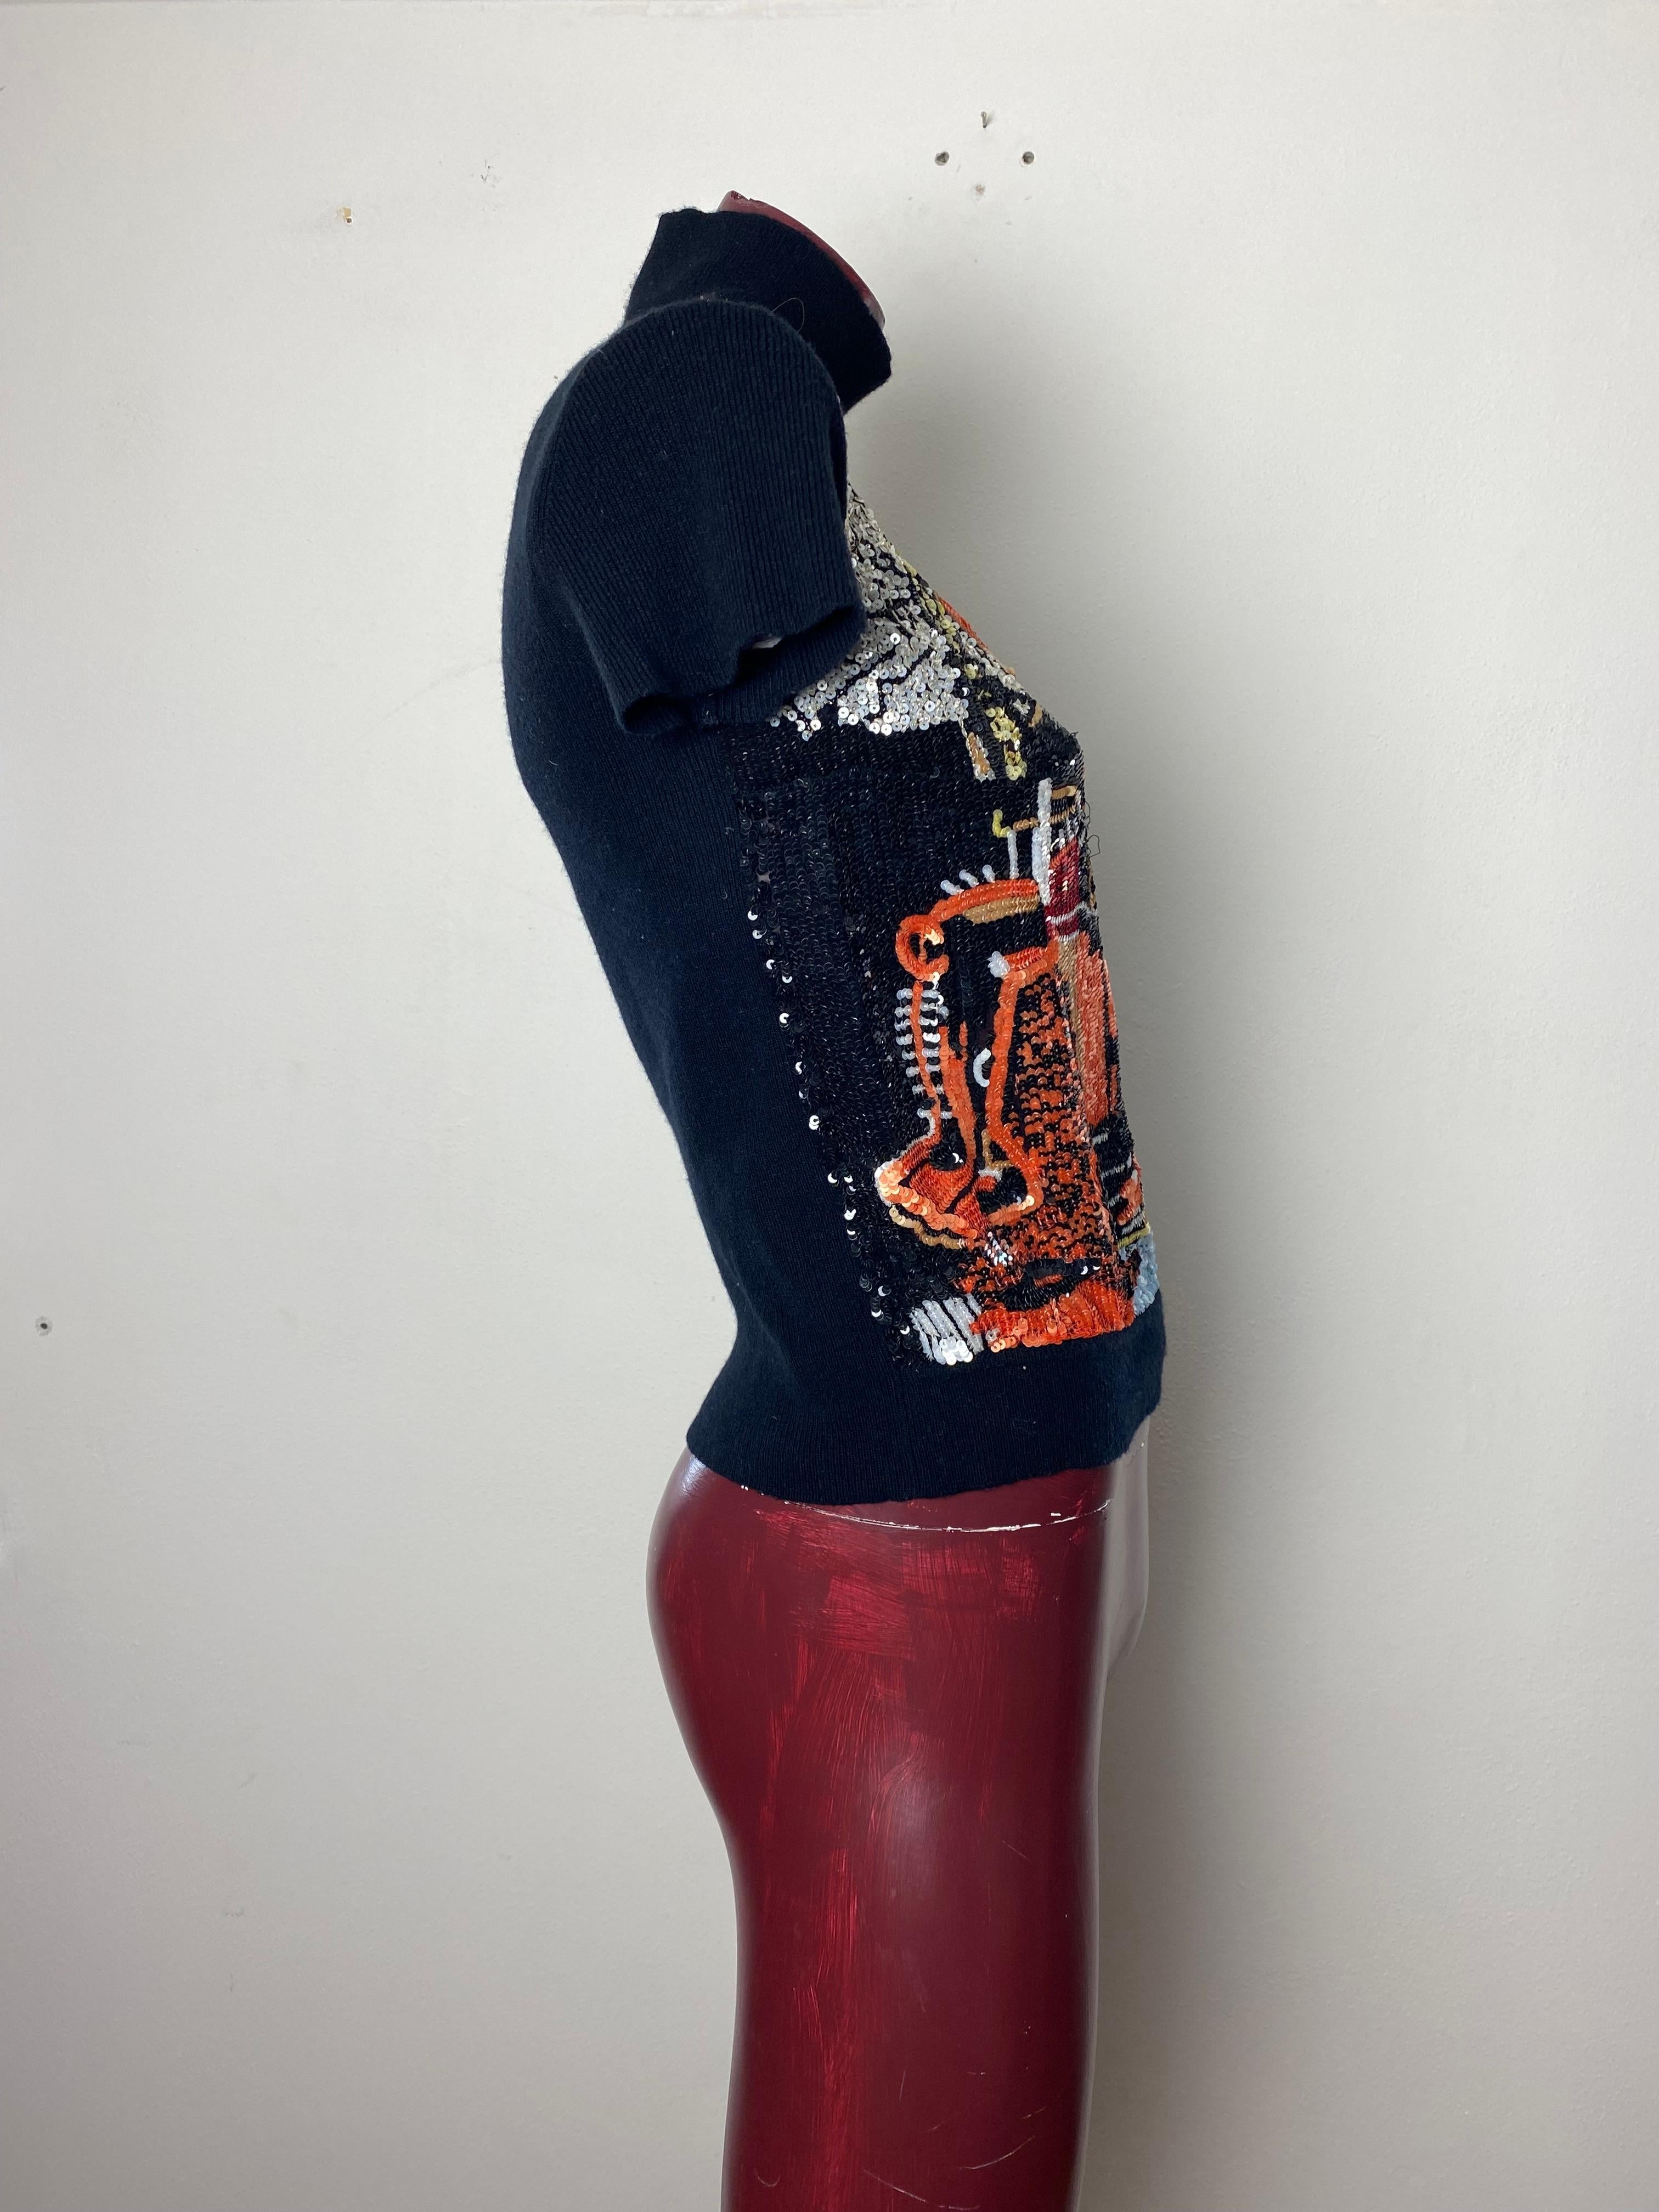 Valentino turtleneck with wonderful pailletes embroidery Basquiat picture For Sale 3